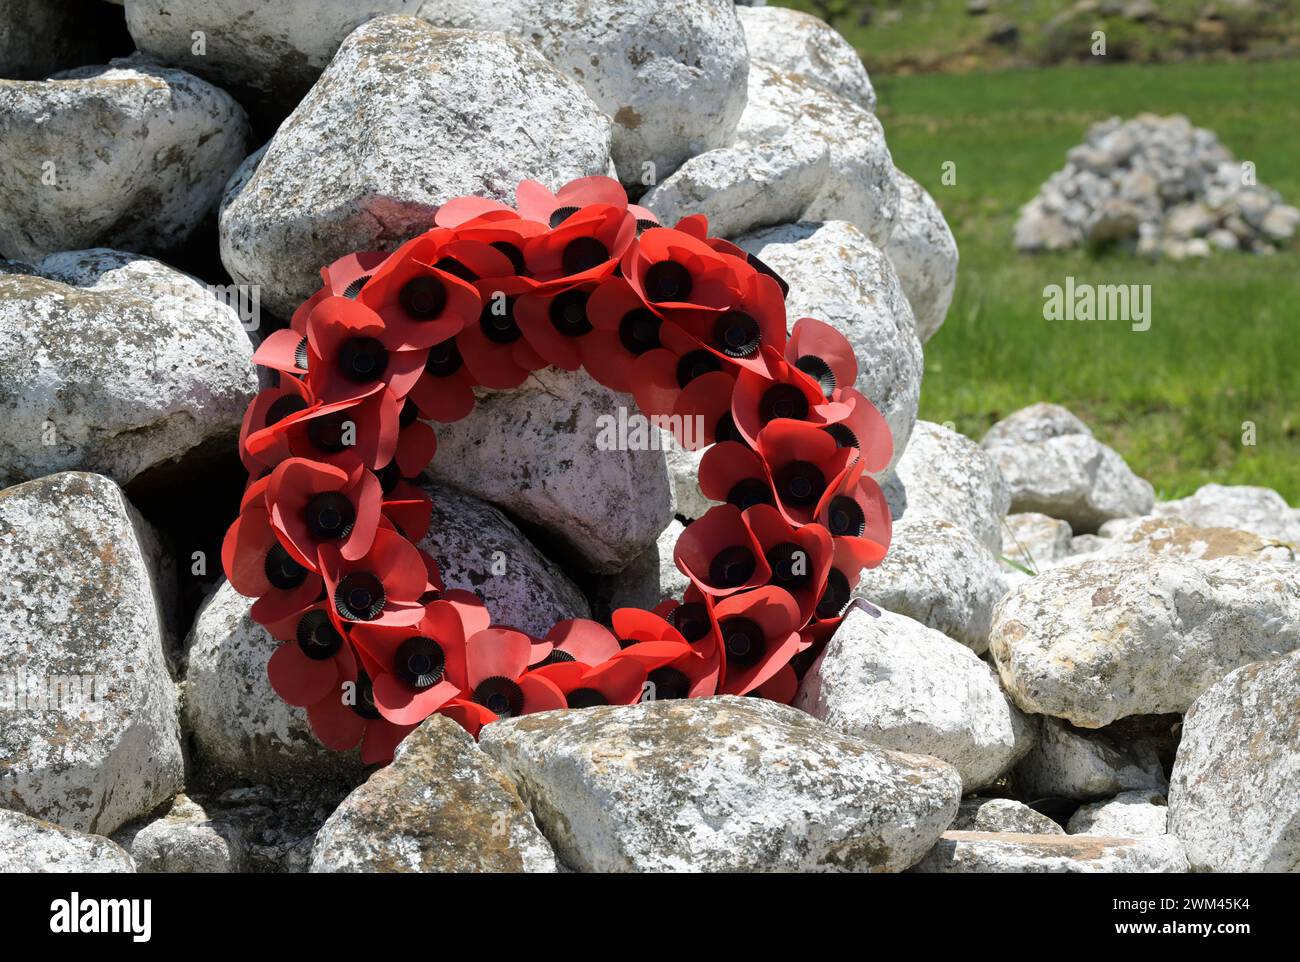 Wreath, ring of flowers, grave cairns of dead British soldiers on battlefield, battle of Isandlwana, 1879 Anglo Zulu war, South Africa, military event Stock Photo